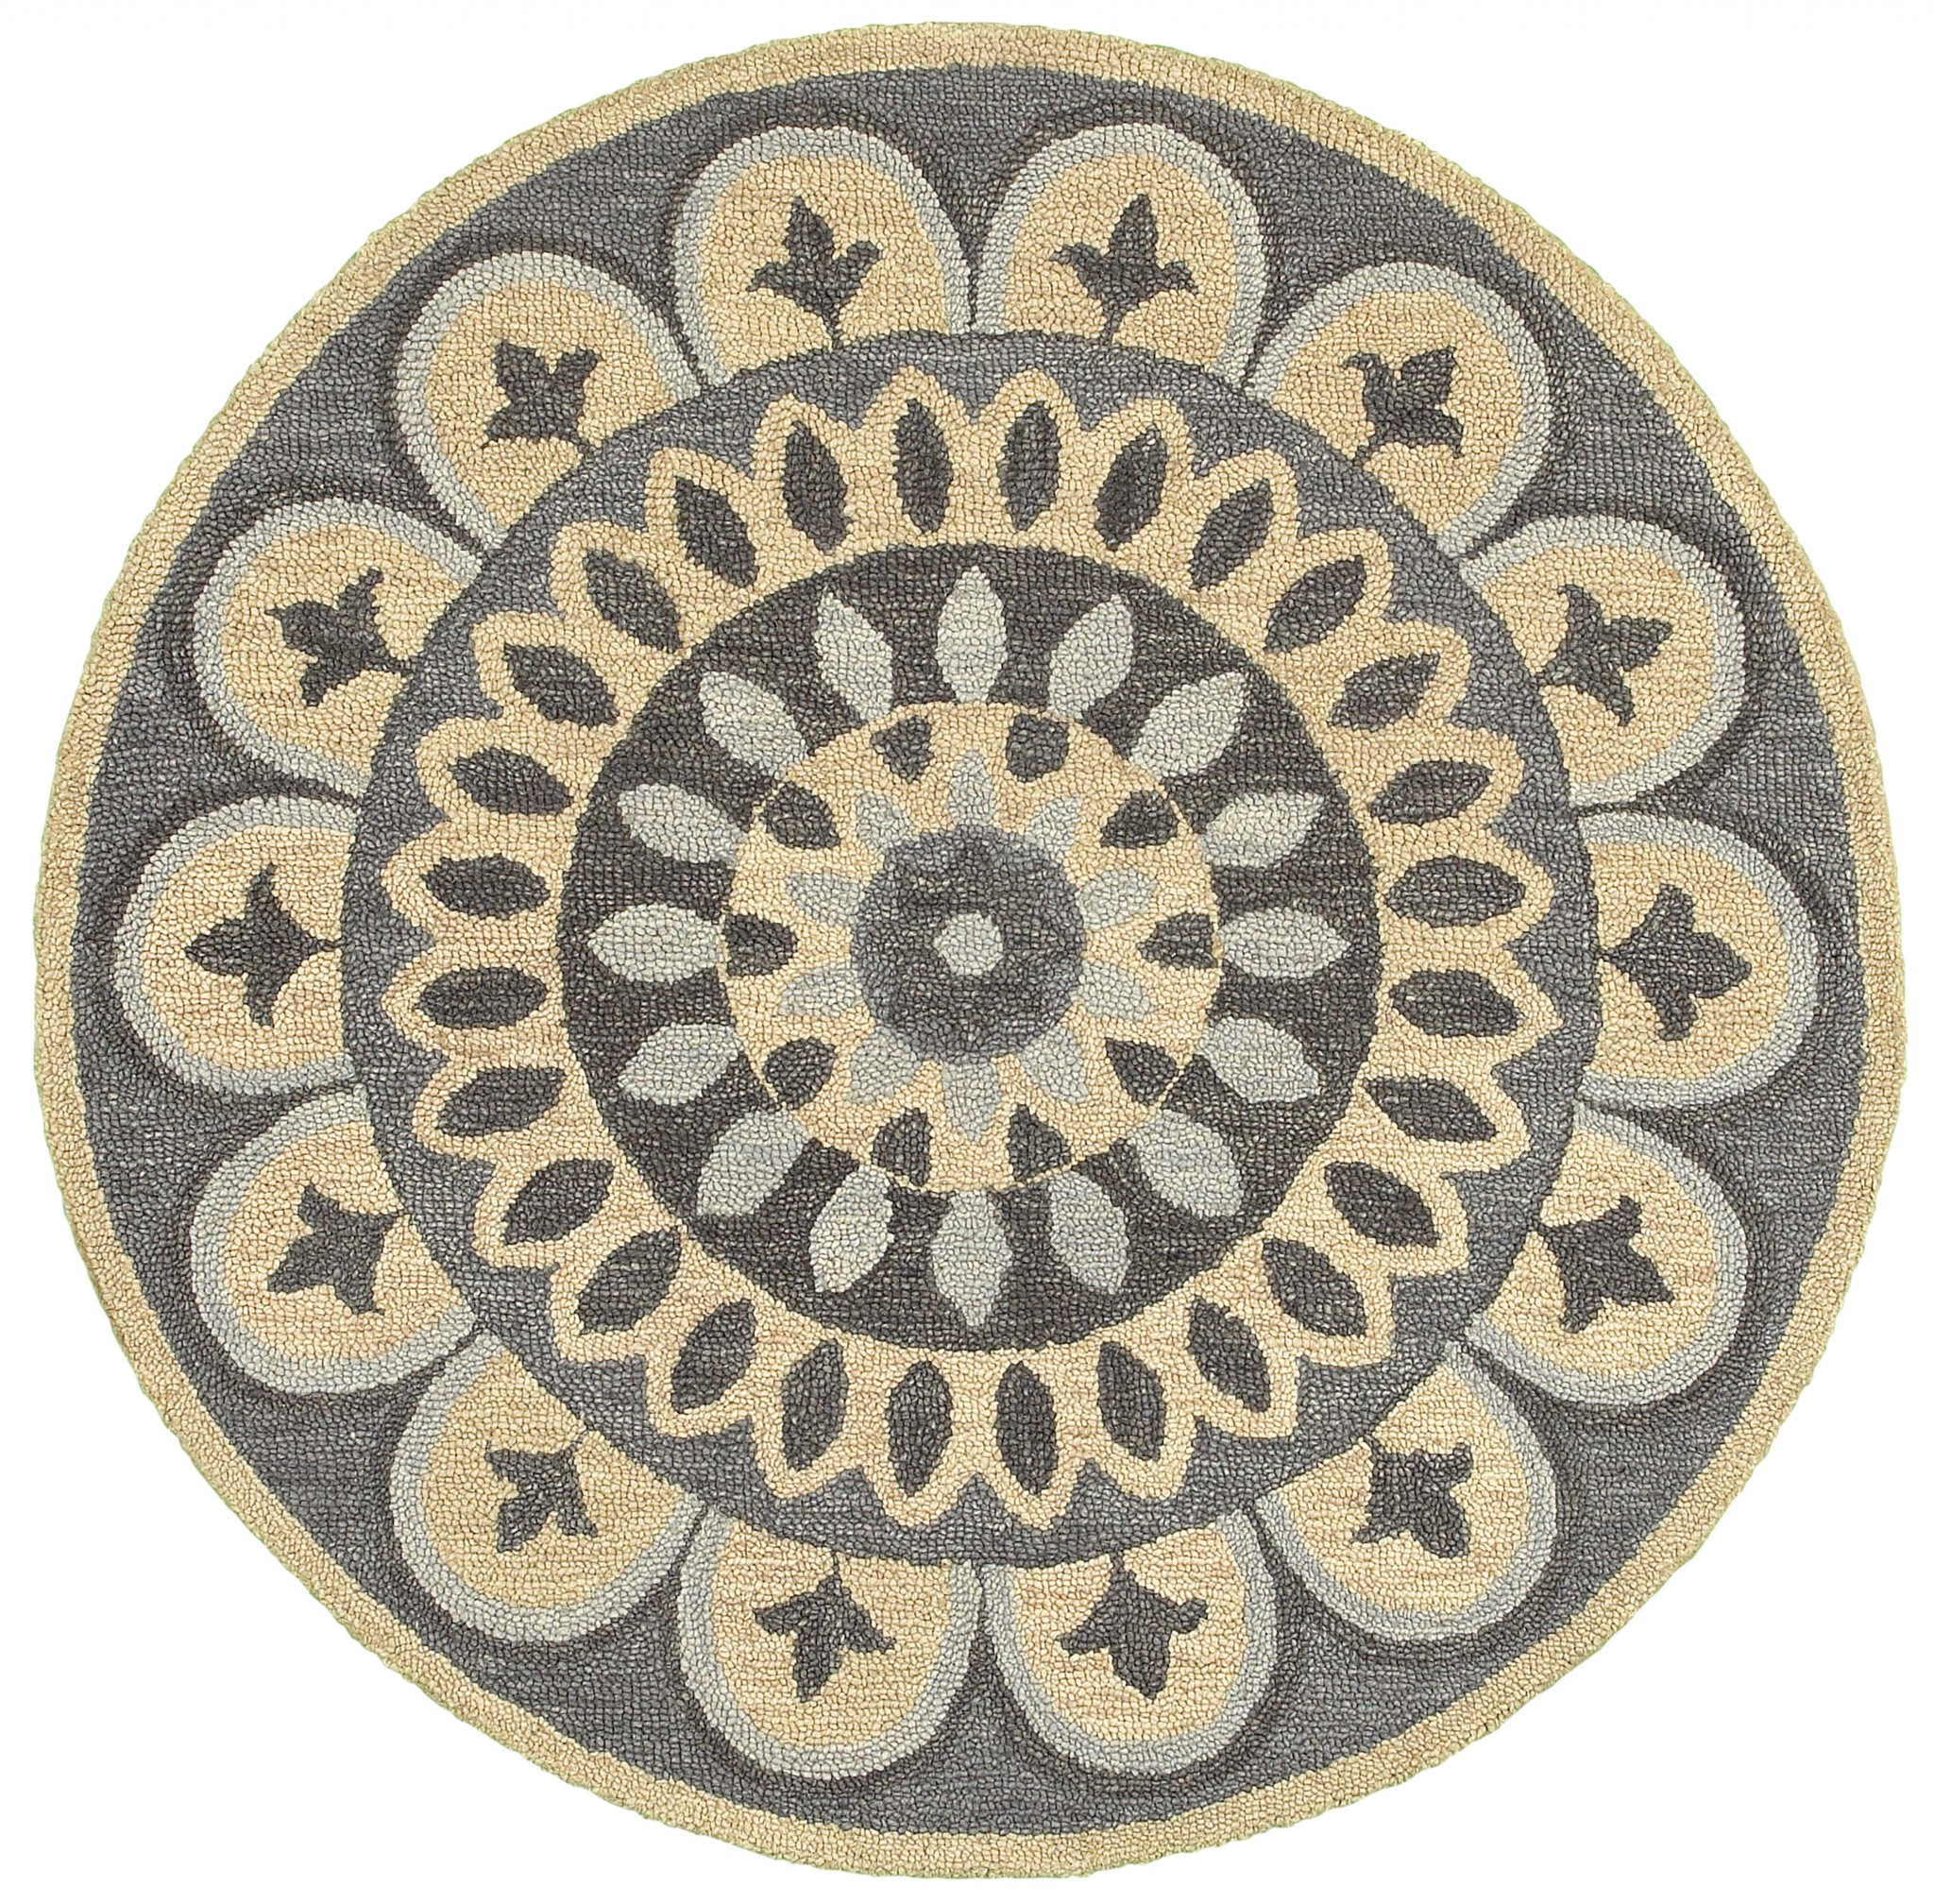 4’ Round Gray Floral Bloom Area Rug-393637-1